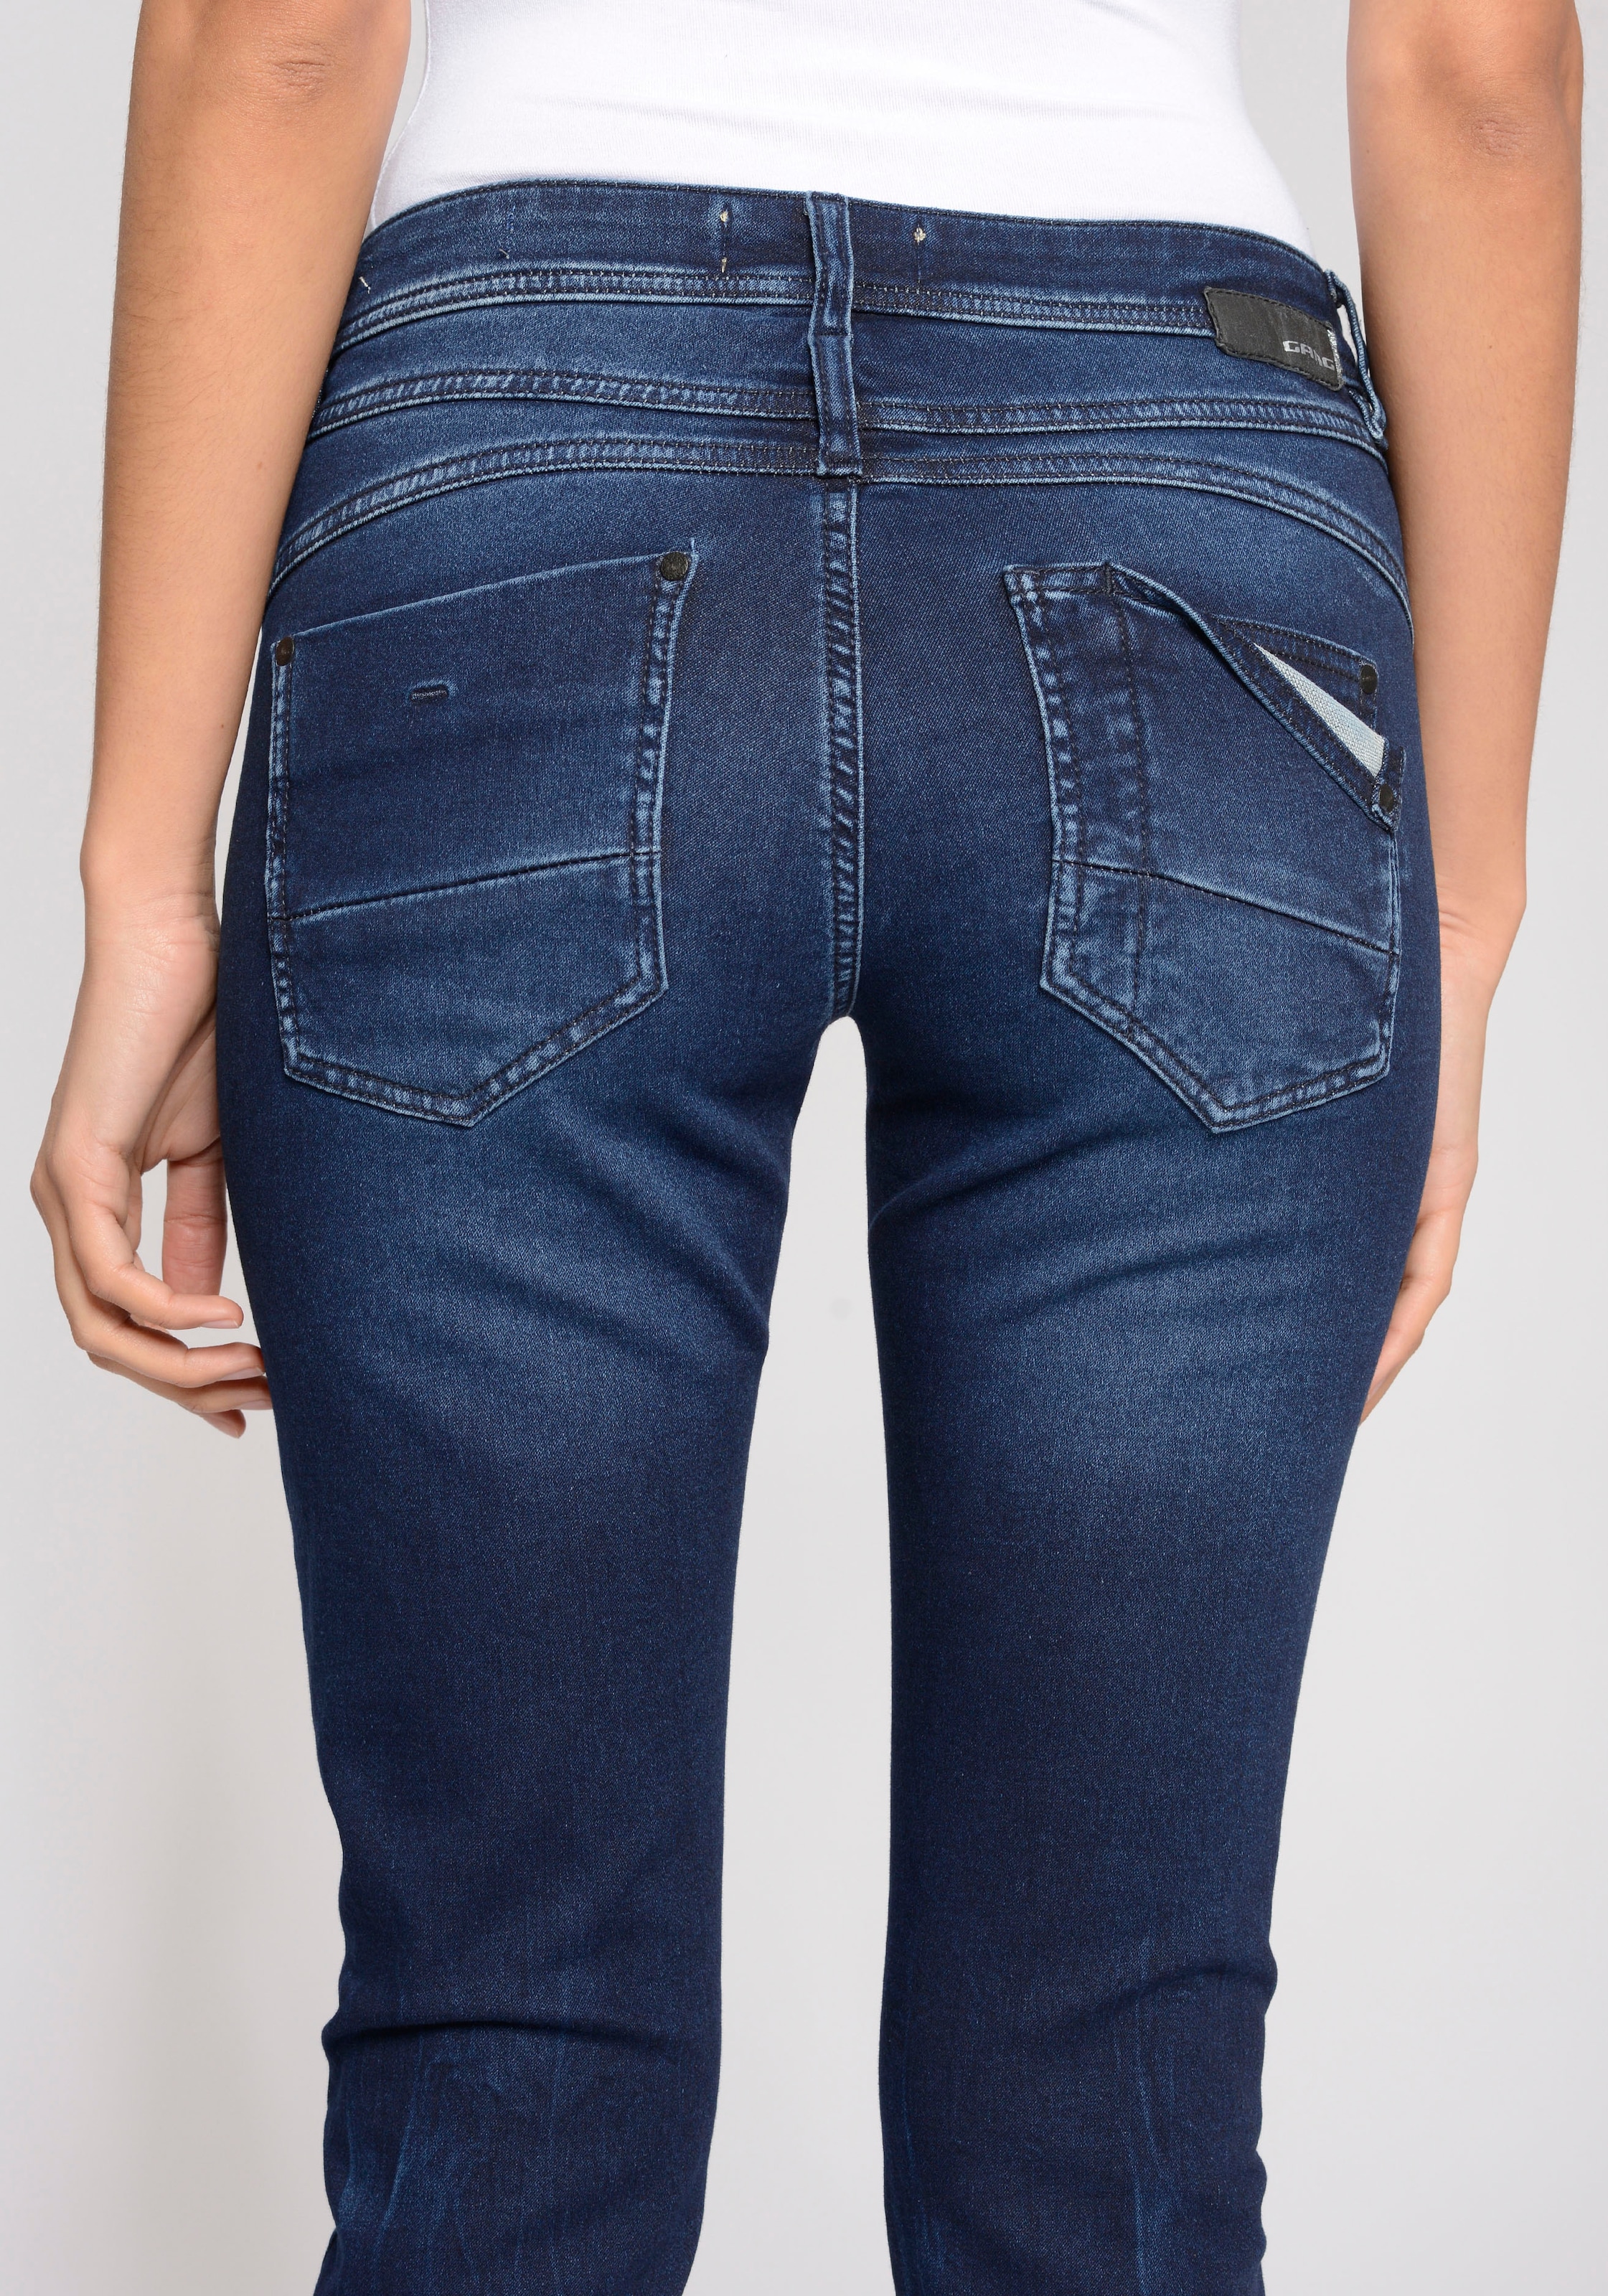 GANG Relax-fit-Jeans »94Amelie Cropped«, aus weicher Cord-Qualität